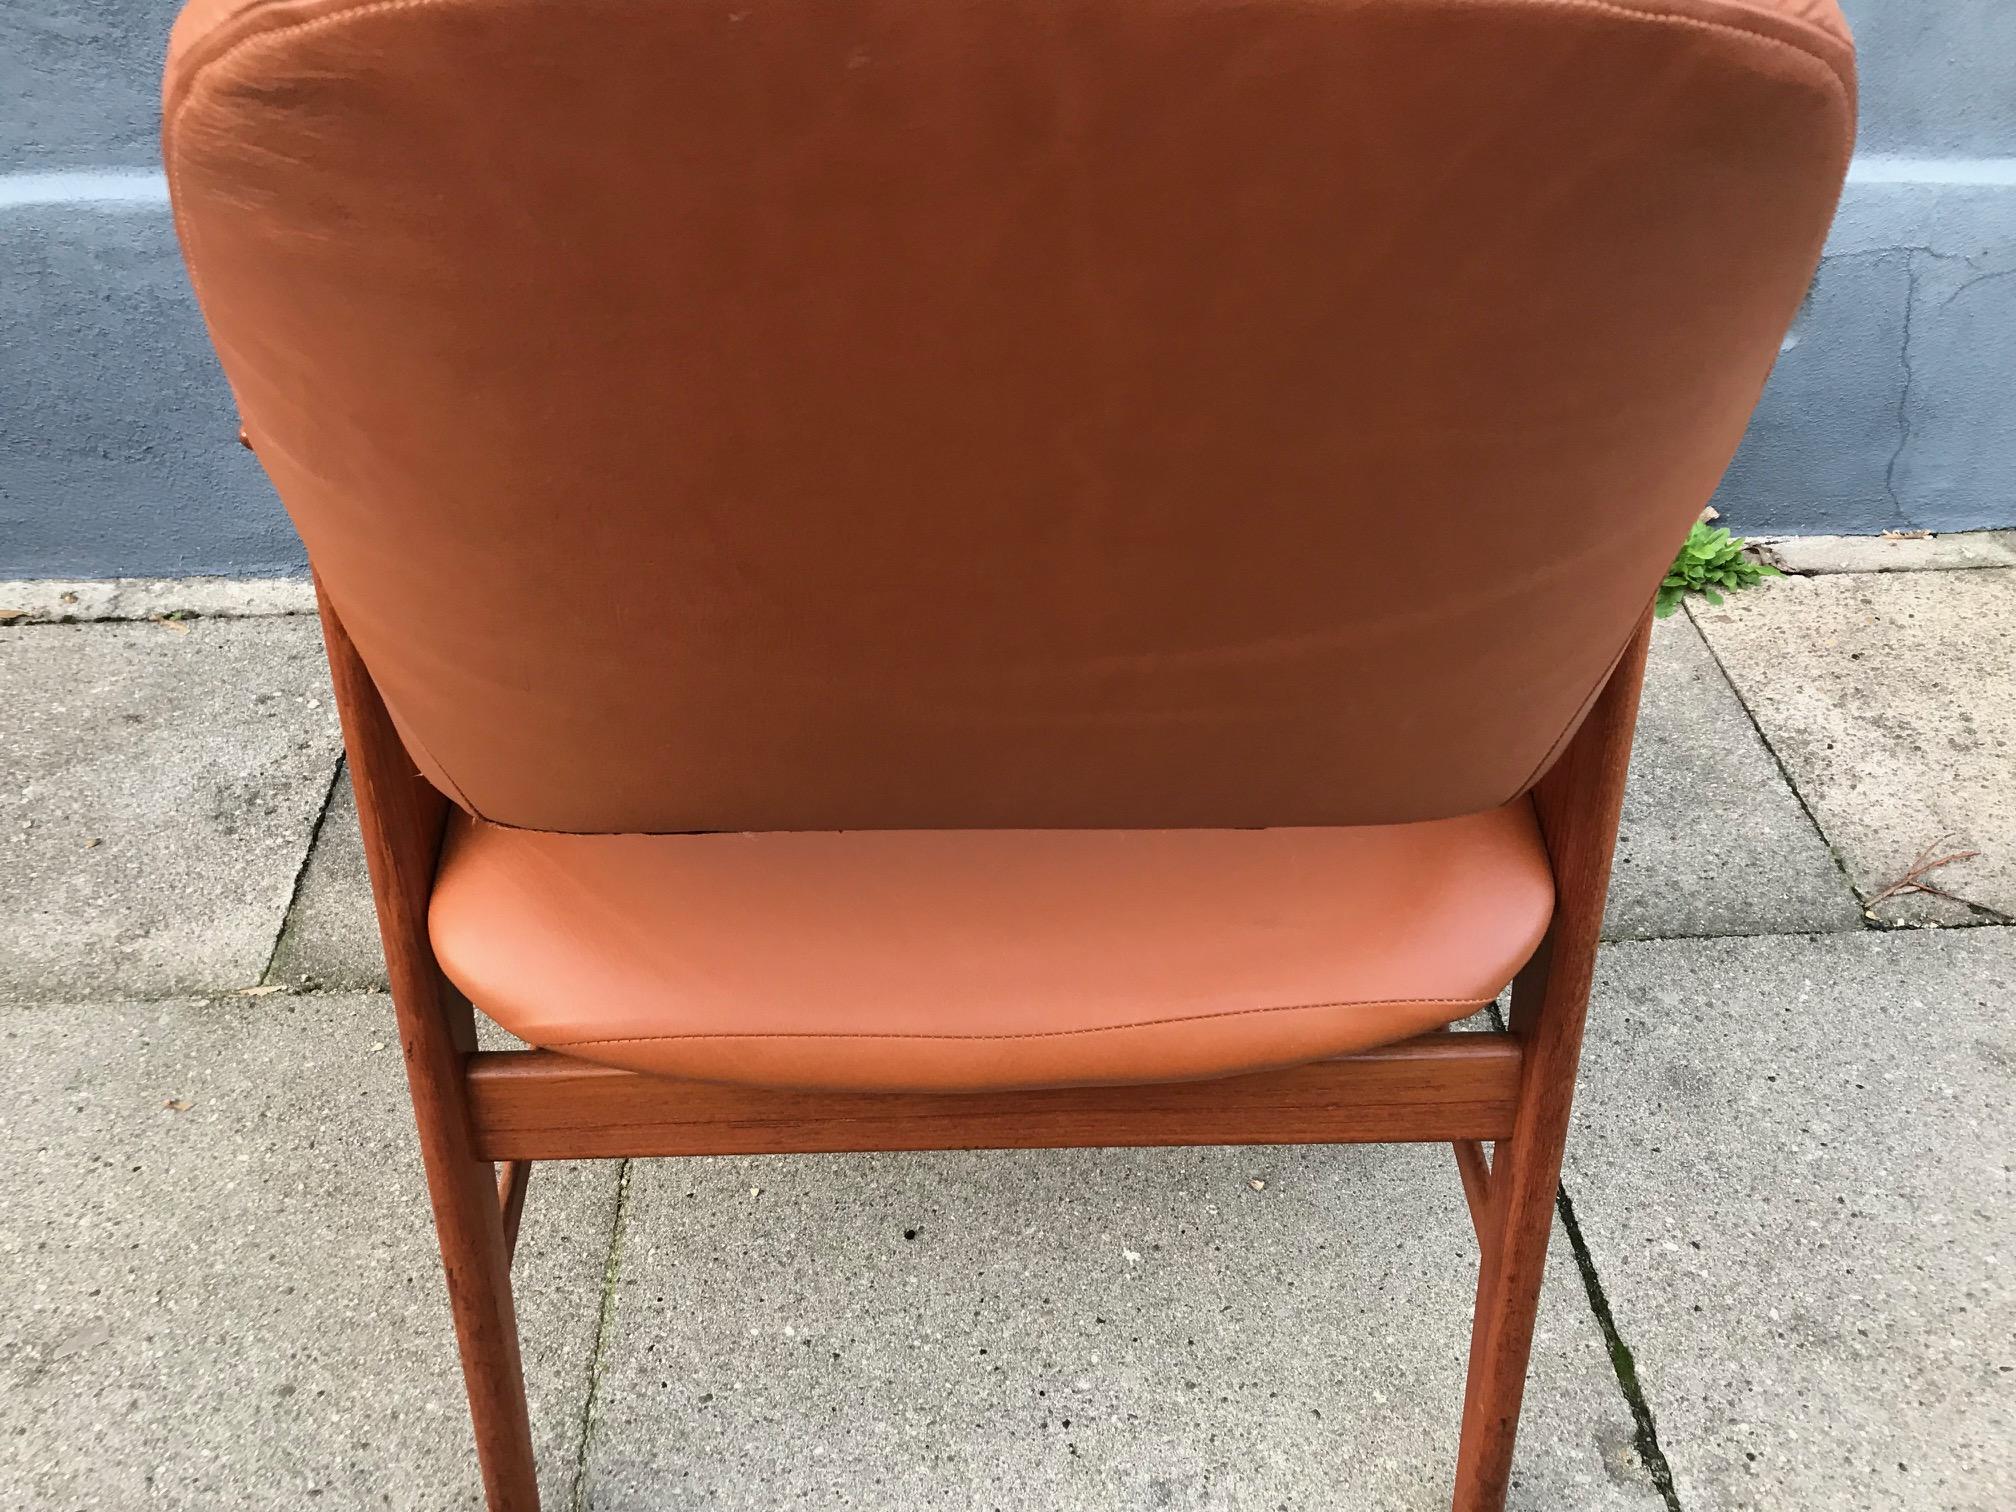 Danish Modern Teak and Leather Lounge Chair by N. A. Jørgensen, 1960s For Sale 7